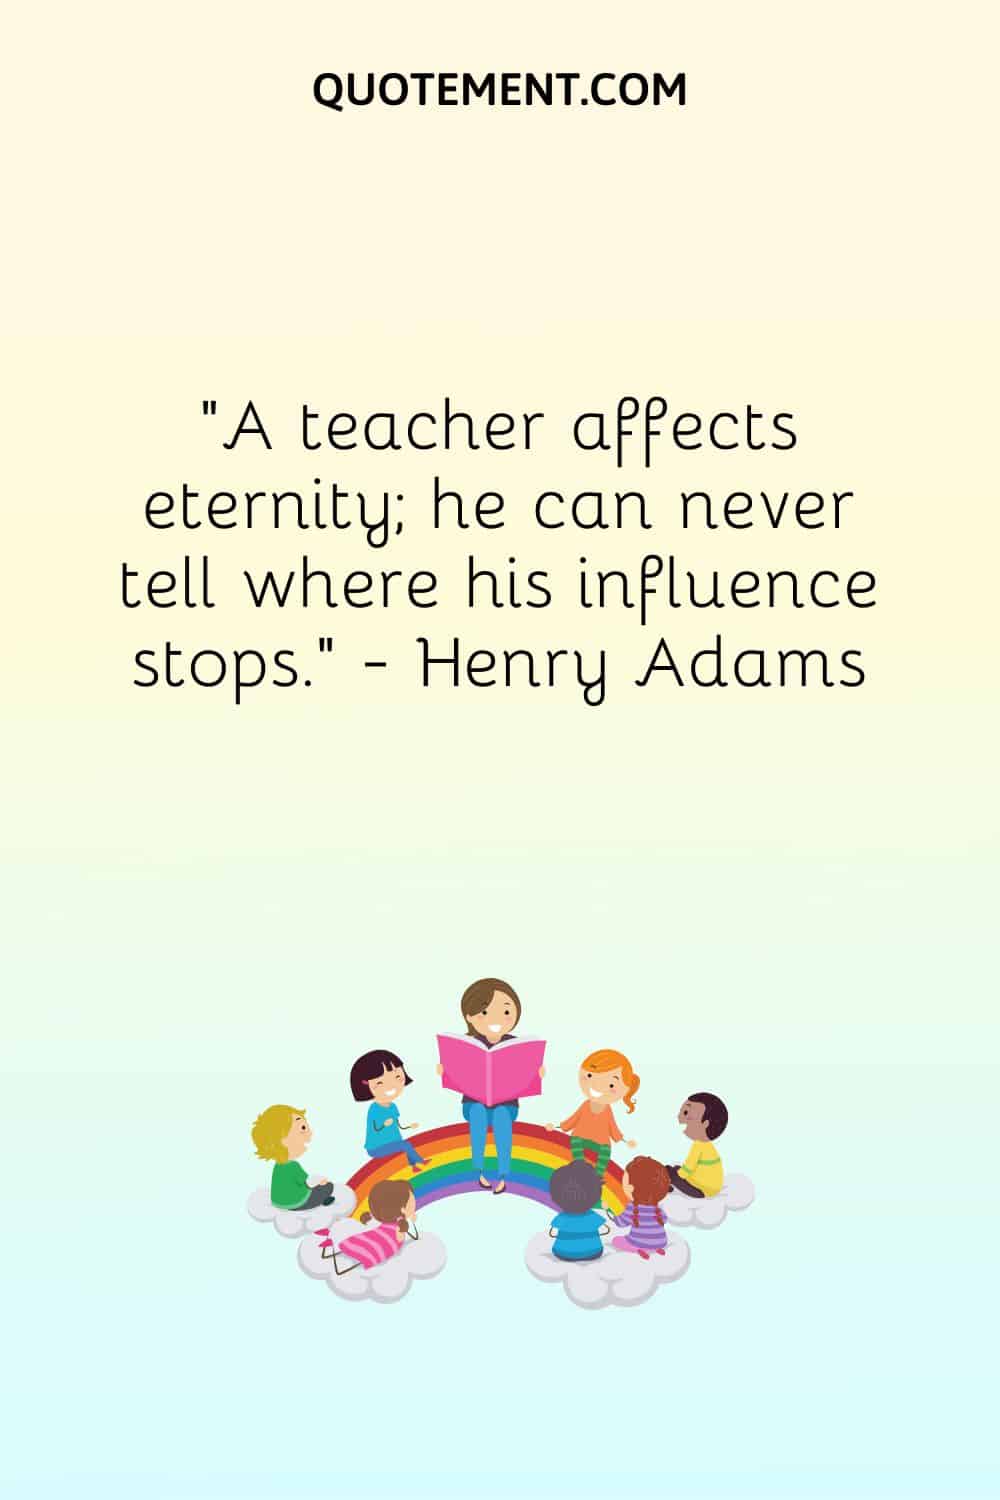 A teacher affects eternity; he can never tell where his influence stops